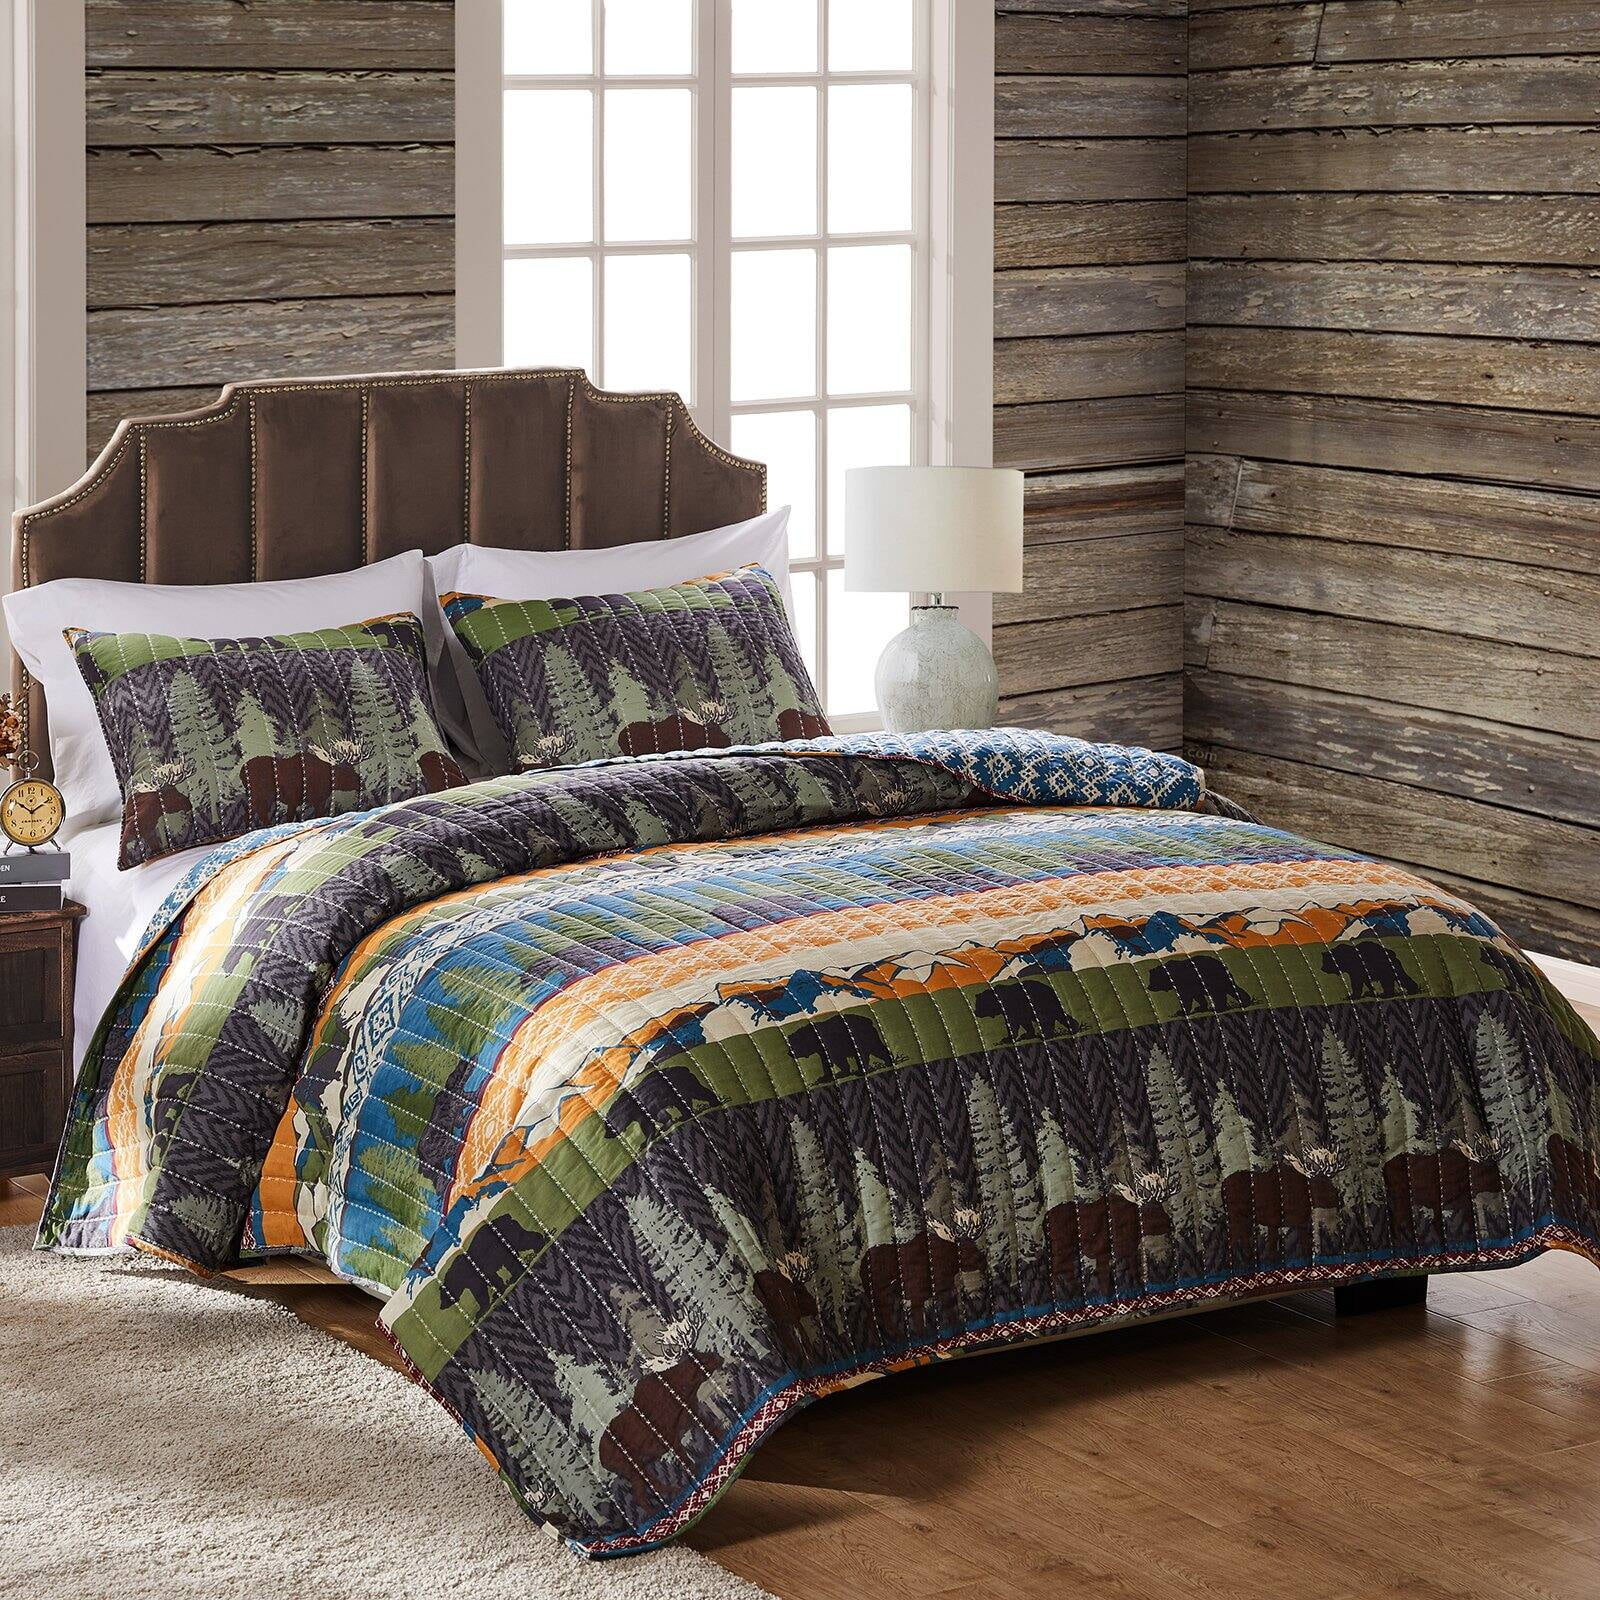 CHESITY Lodge Bedspread Twin Size Quilt,Lightweight Cabin Quilts Set Twin Size,3Pcs Rustic Moose Bear Bedspreads Reversible Lodge Coverlet Sets Deer Tree Printed Quilt Pillow Shams 